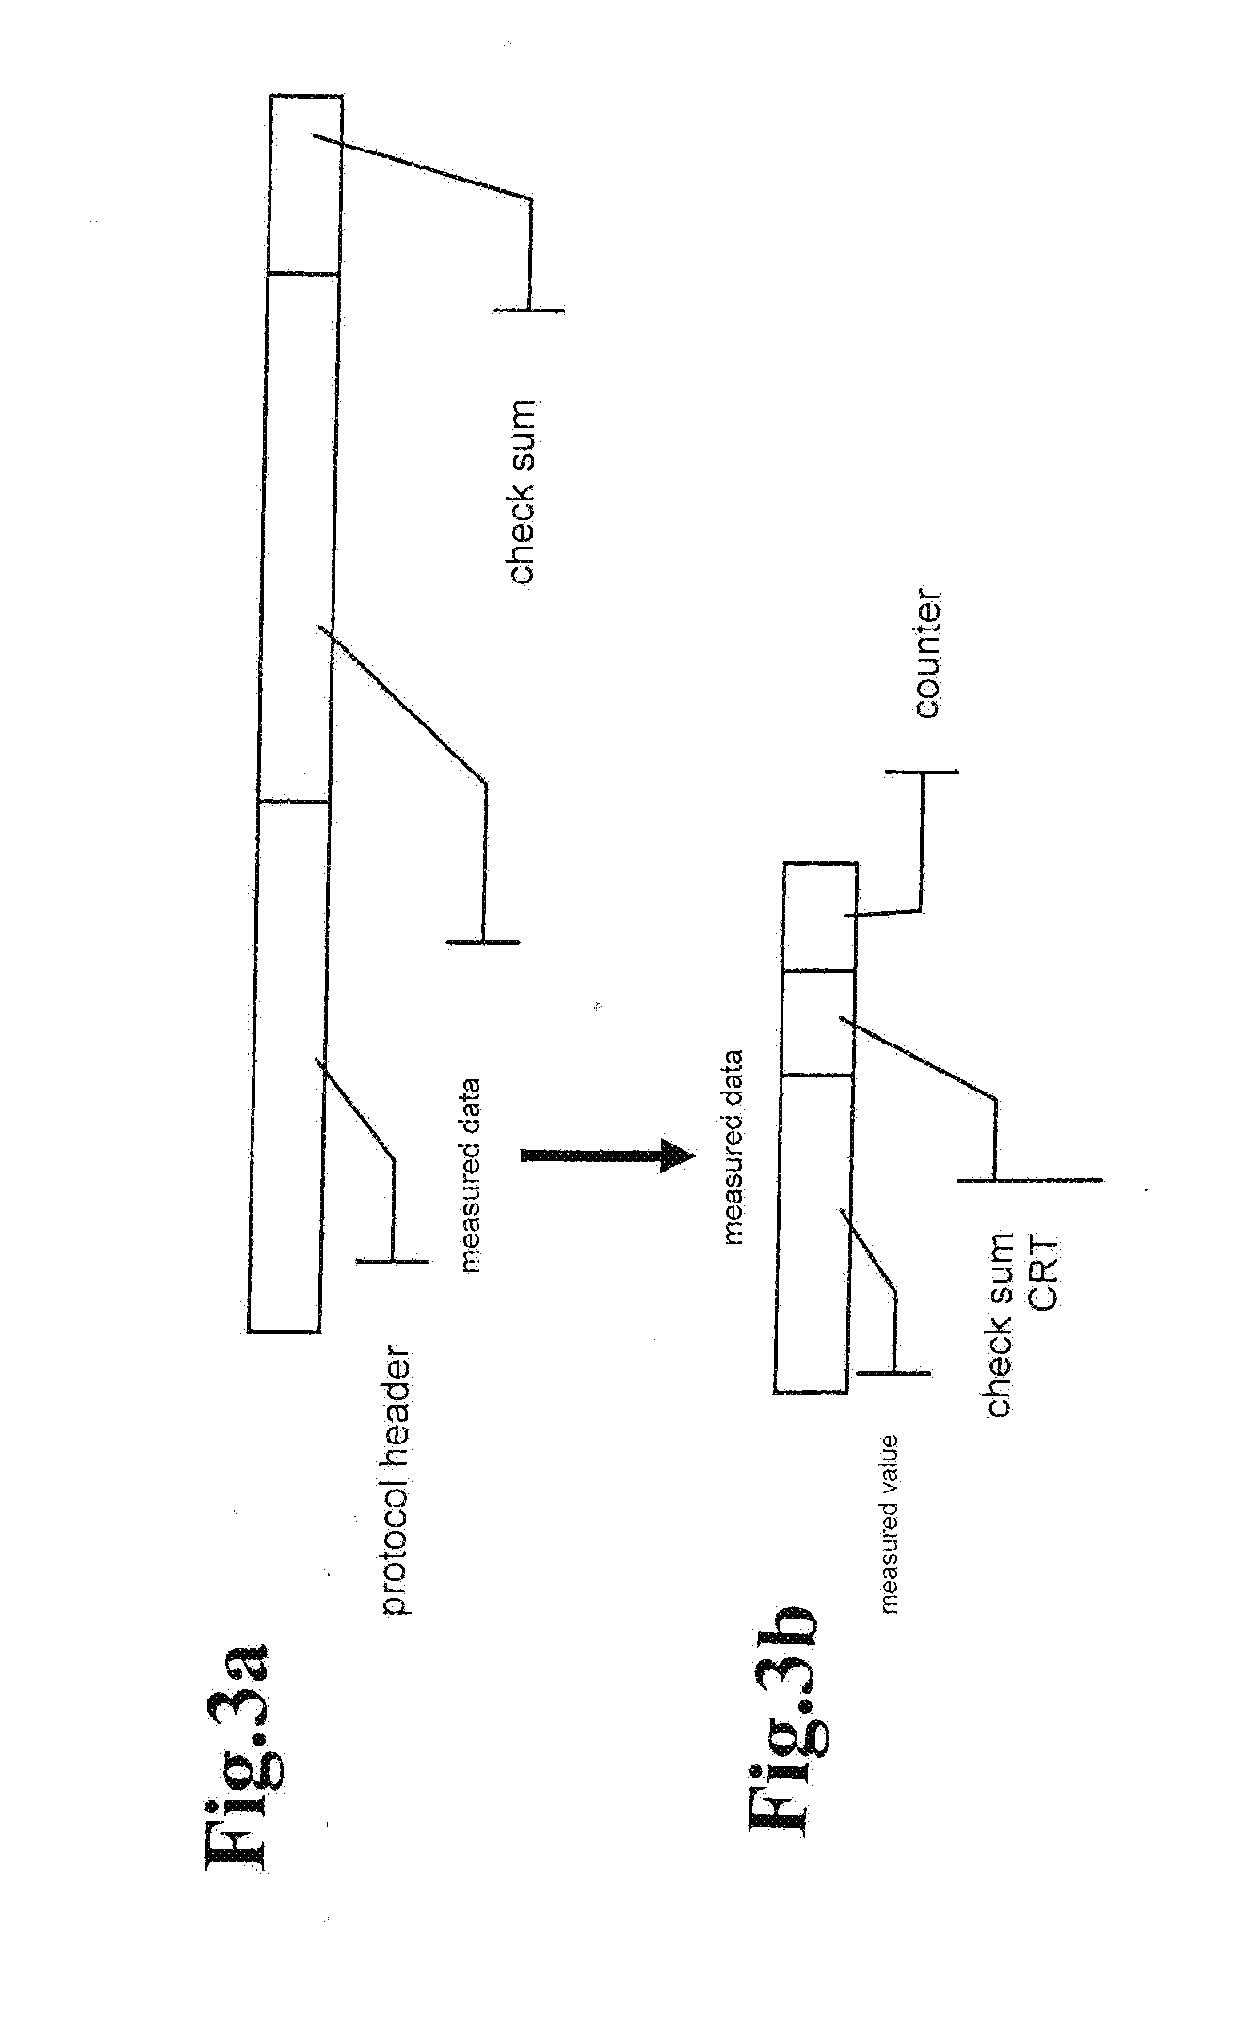 Control system for construction machines and method for operating the control system